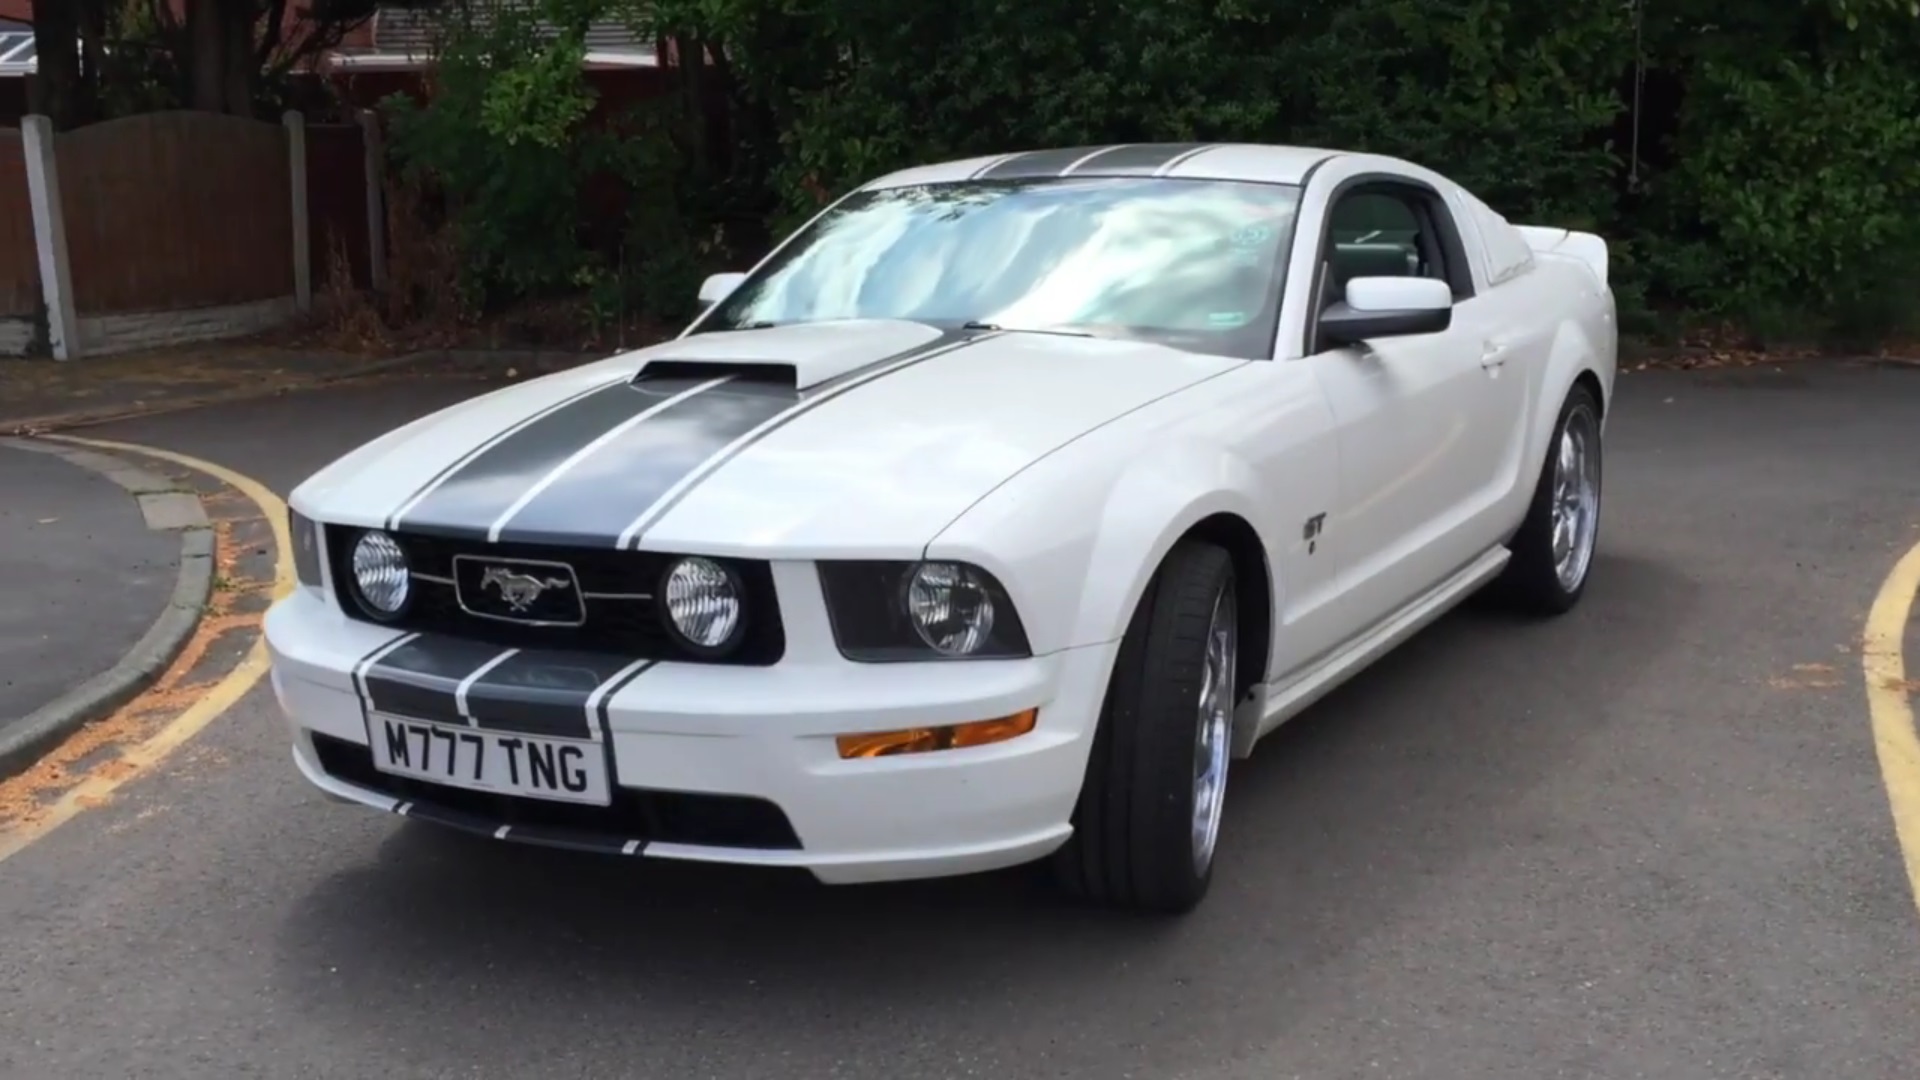 Video: Hear That V8 Engine Roar From A 2005 Ford Mustang GT!